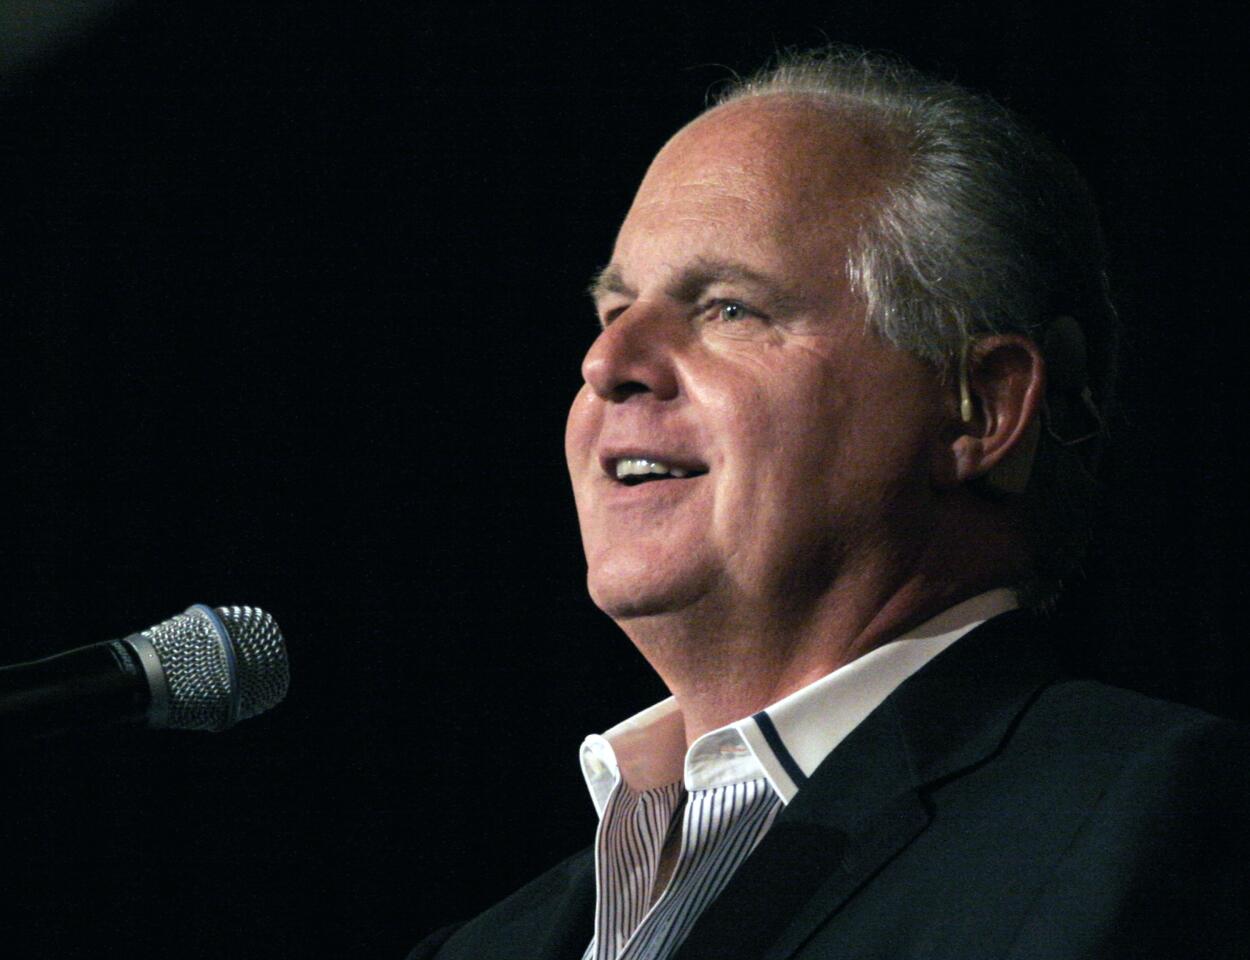 Rush Limbaugh speaks into a microphone.